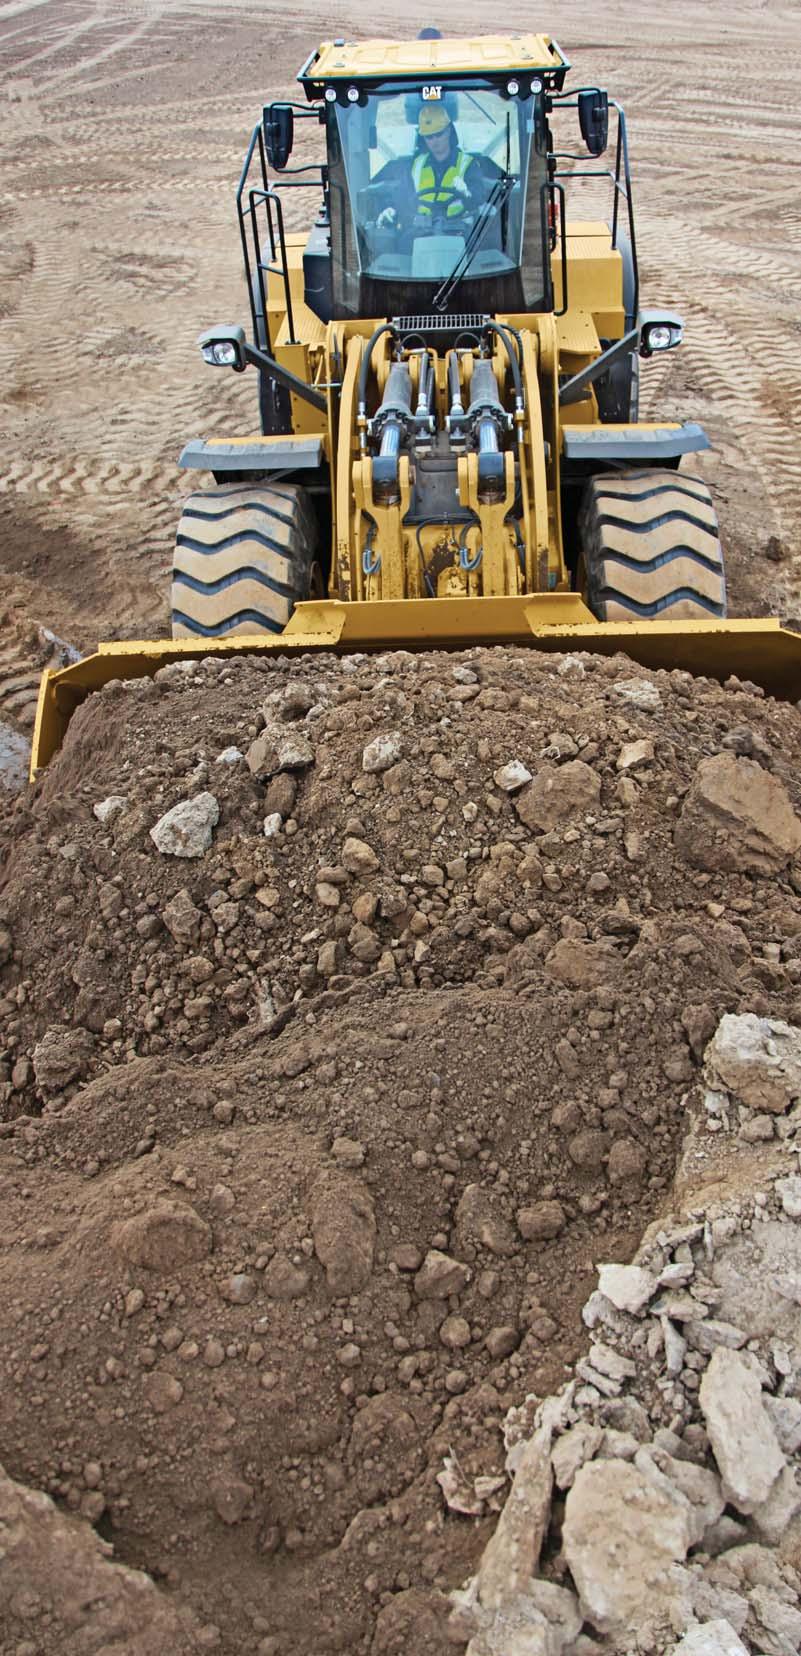 The 980L Wheel Loader applies proven technologies systematically and strategically to meet your high expectations for reliability, productivity, fuel efficiency, and long service life.